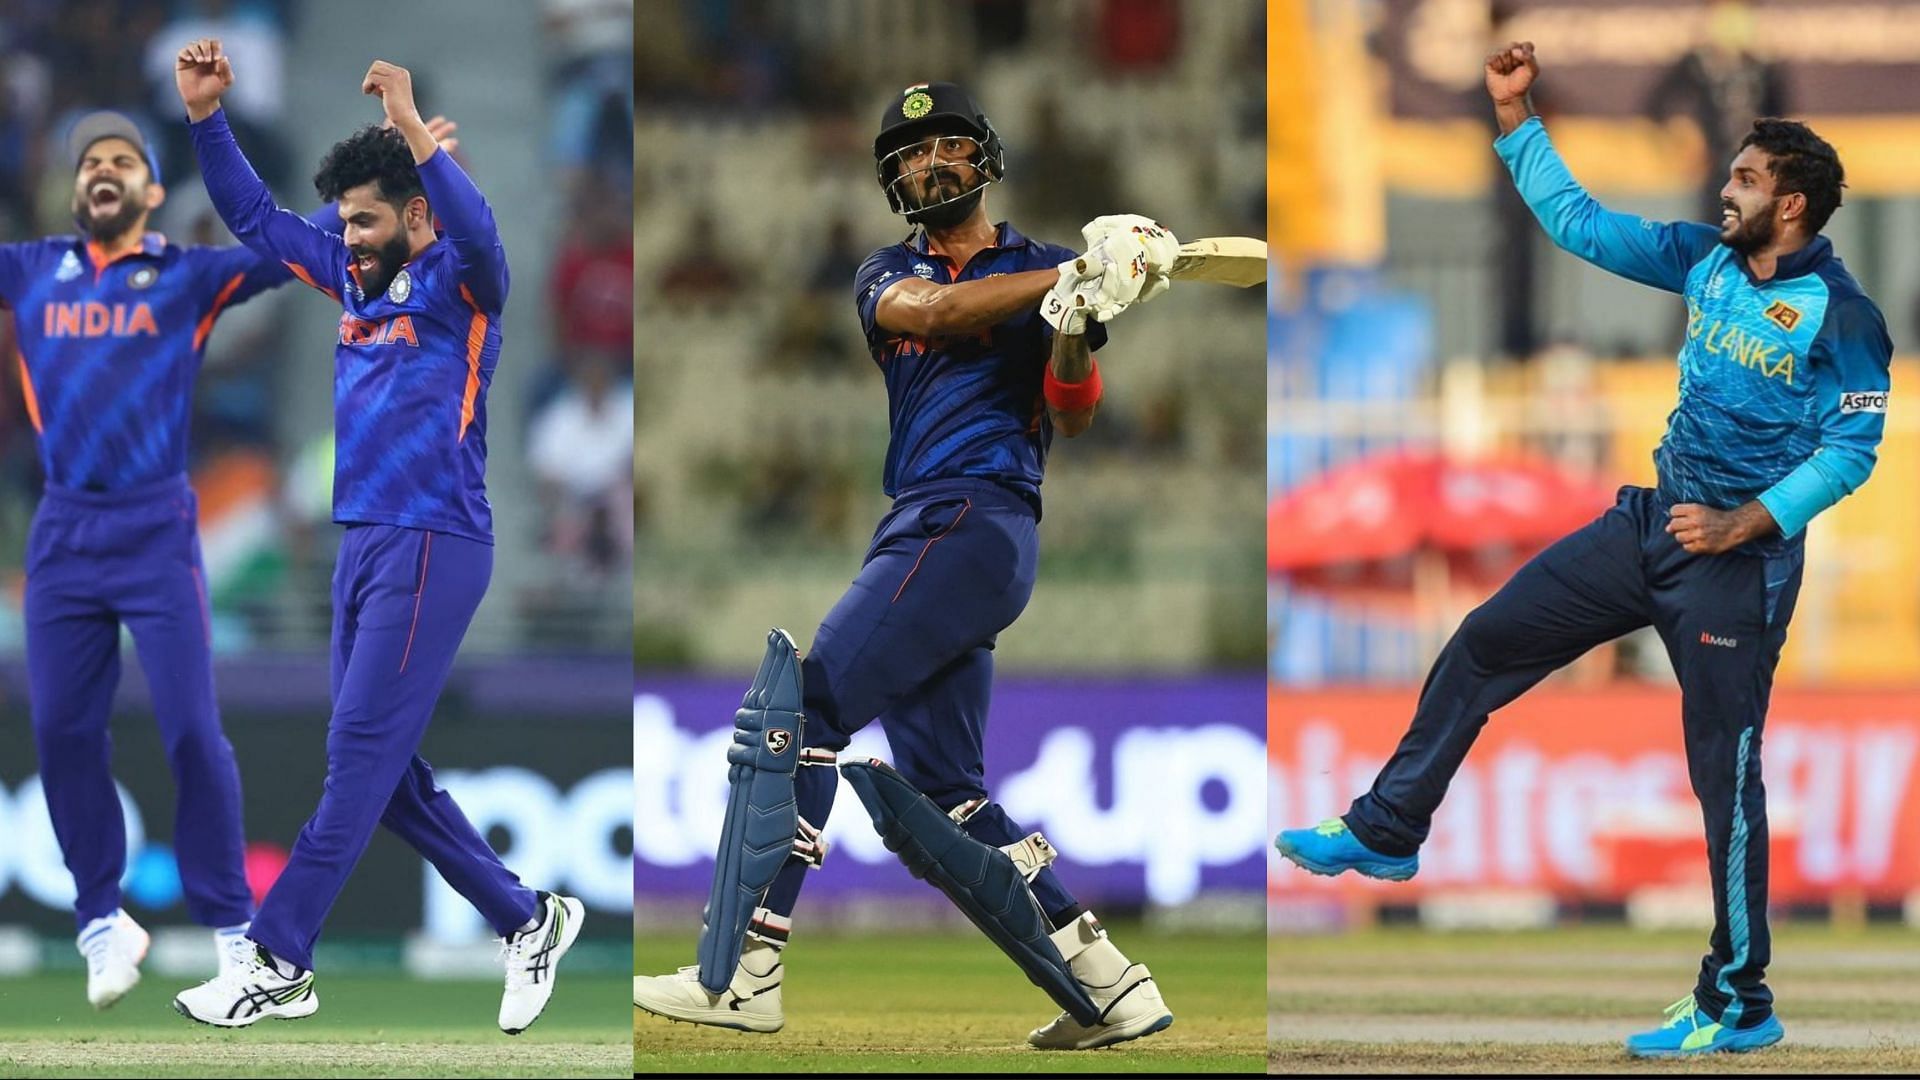 Ravindra Jadeja, KL Rahul and Wanindu Hasaranga feature in the best playing XI of teams eliminated from ICC T20 World Cup 2021 (Image Source: Instagram)